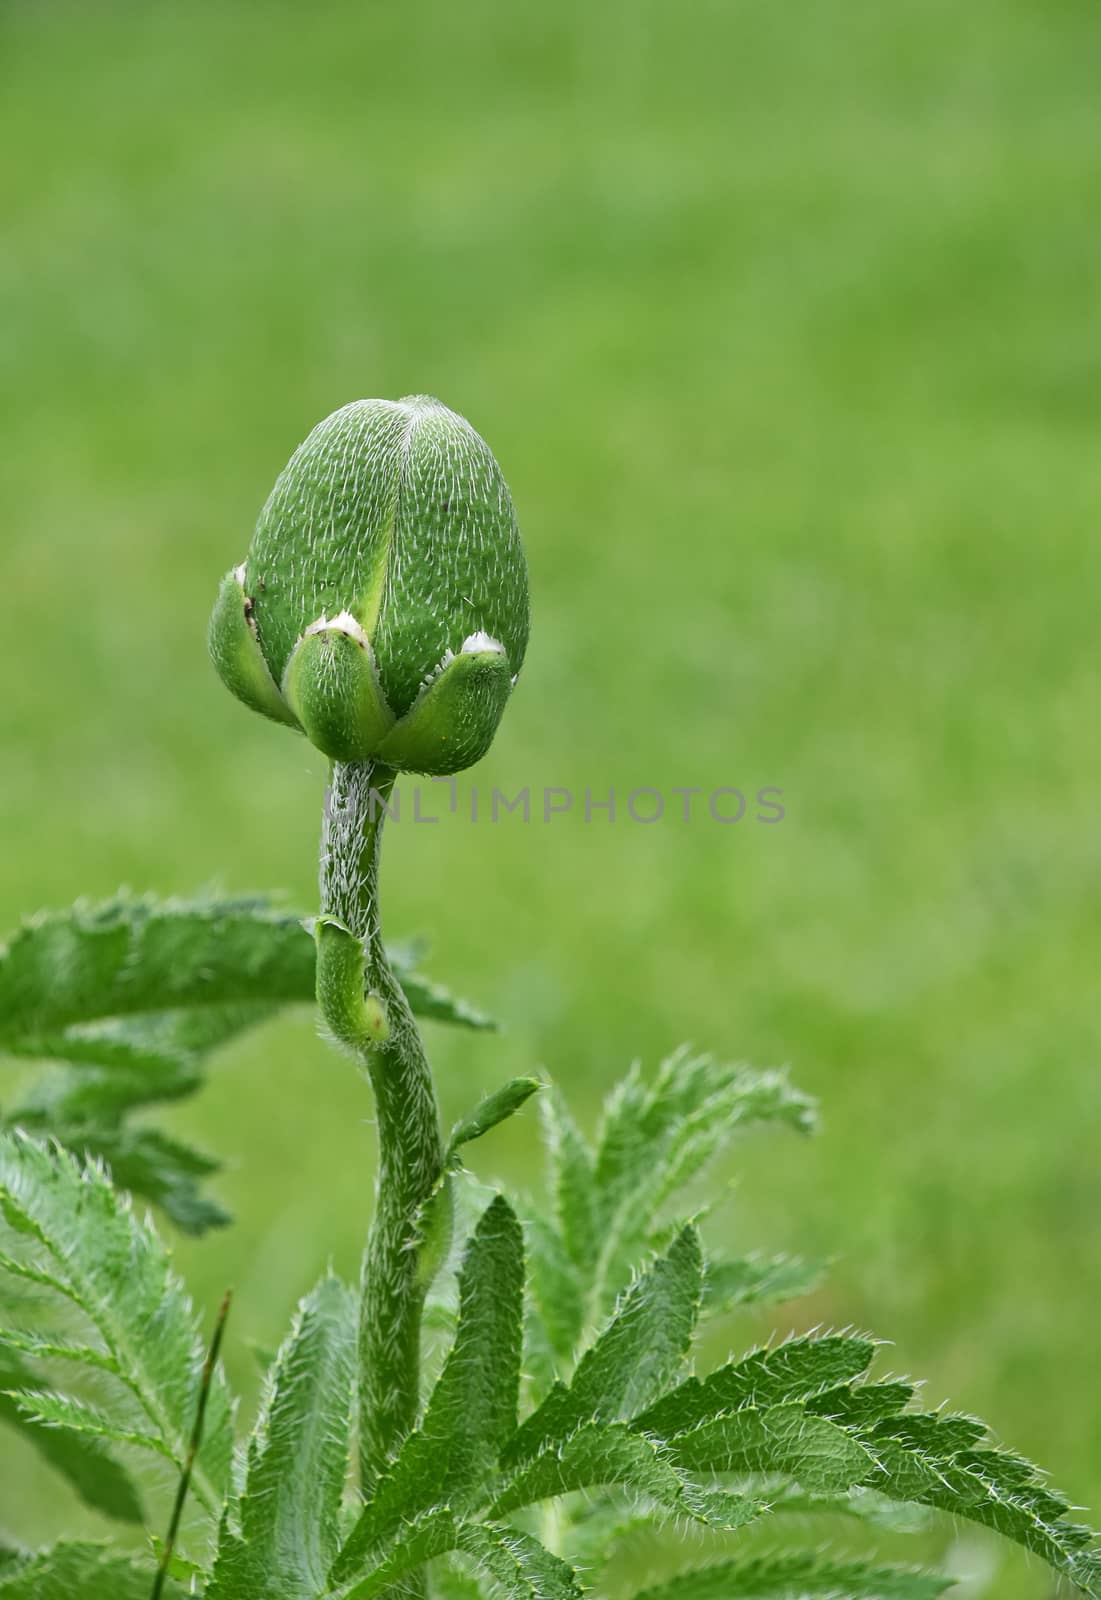 One unopen big garden poppy Papaver flower button bud and leaves over green grass background